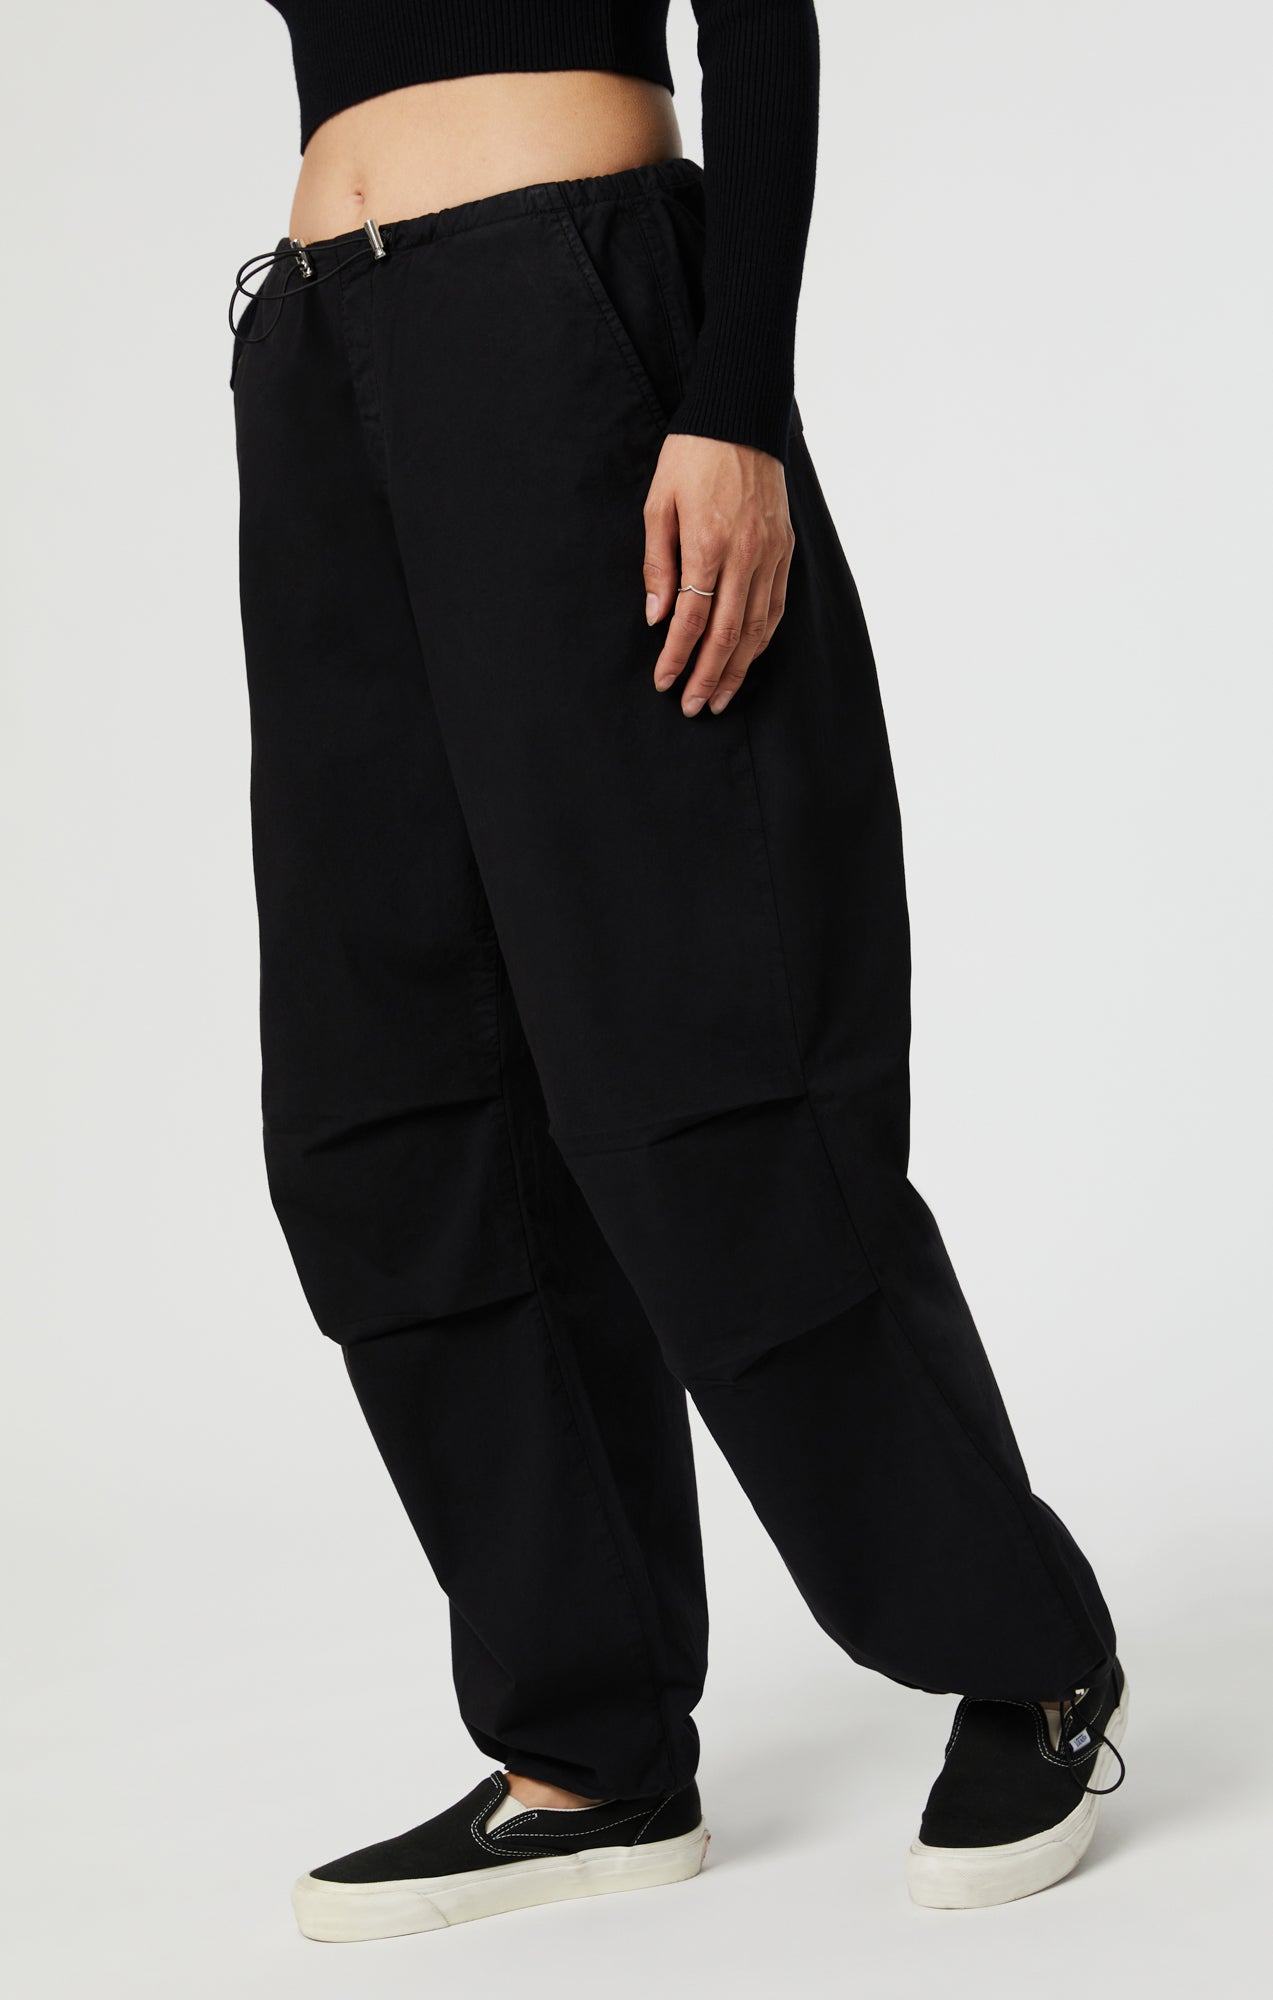 Women's High-rise Cargo Parachute Pants - All In Motion™ Black L